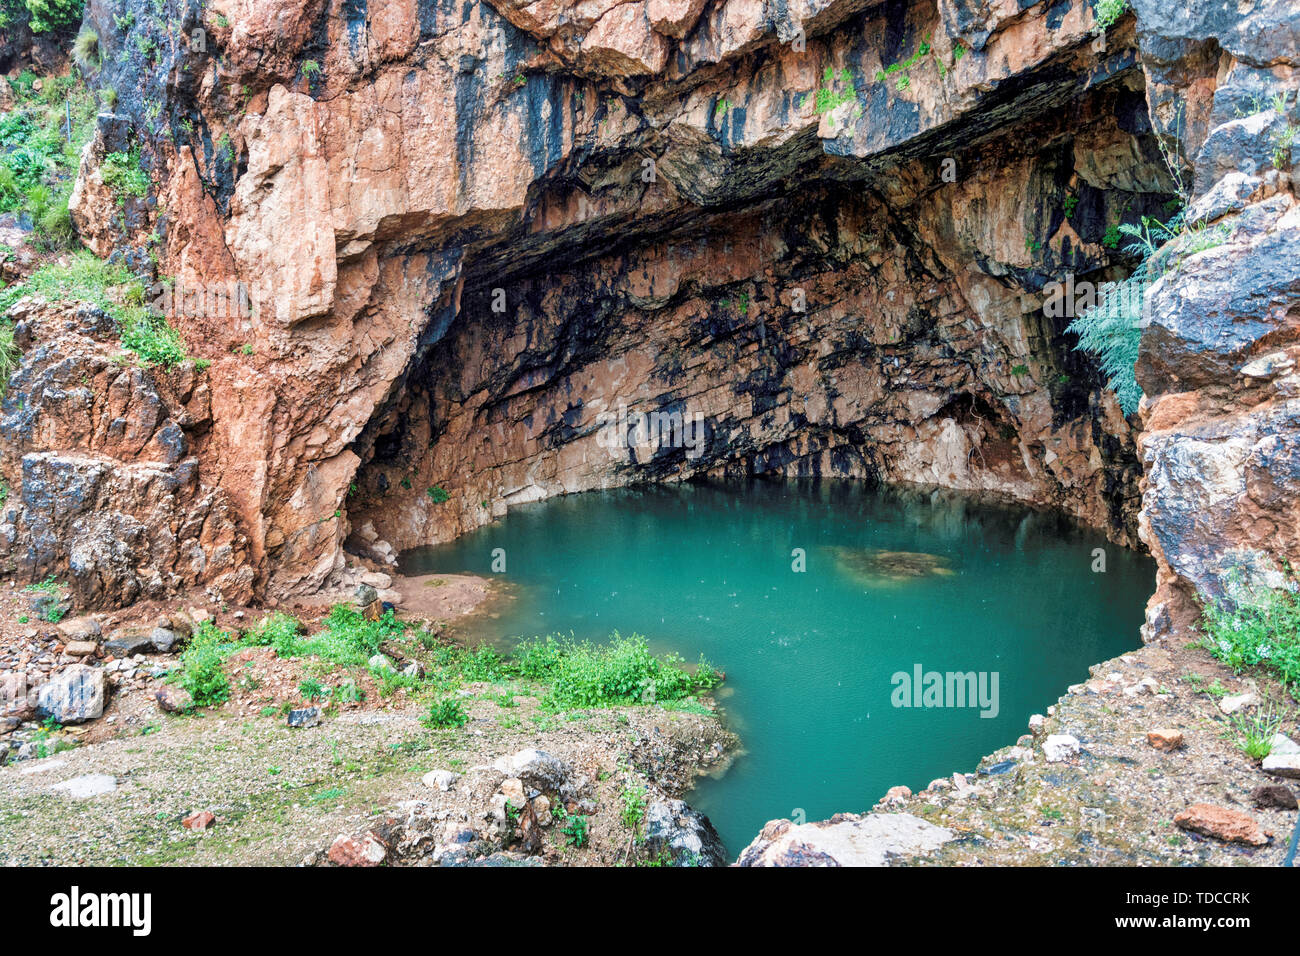 The Grotto of the God Pan 3rd Century BCE filled with water ,Hermon Stream Nature reserve and Archaeological Park ,Banias, Golan Heights Israel Stock Photo